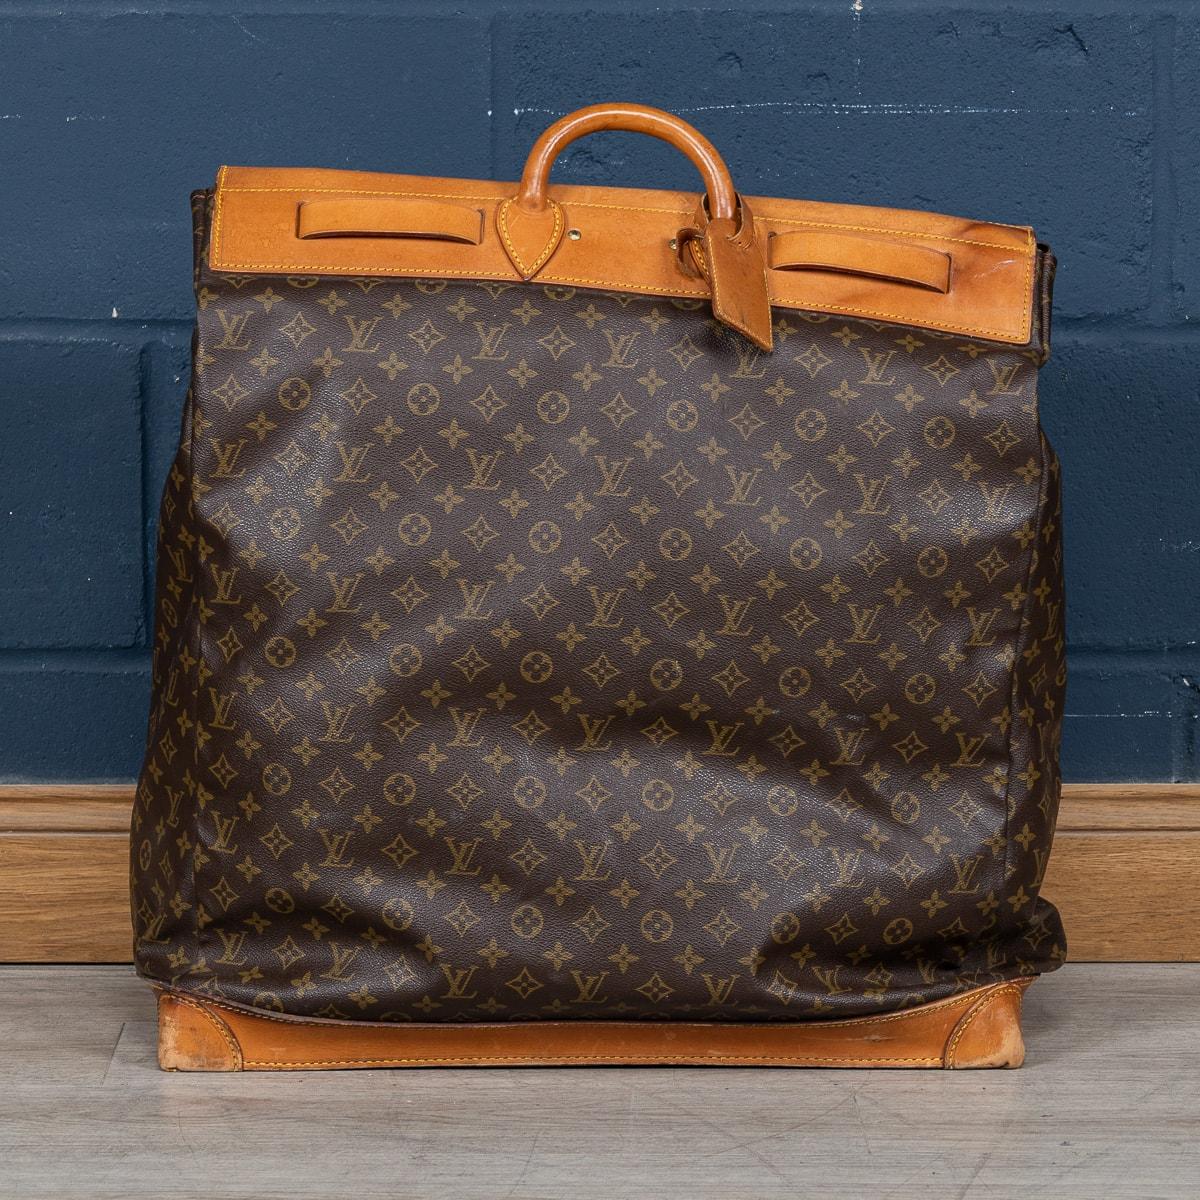 French 20th Century Louis Vuitton Steamer Bag In Monogram Canvas, Made In France For Sale